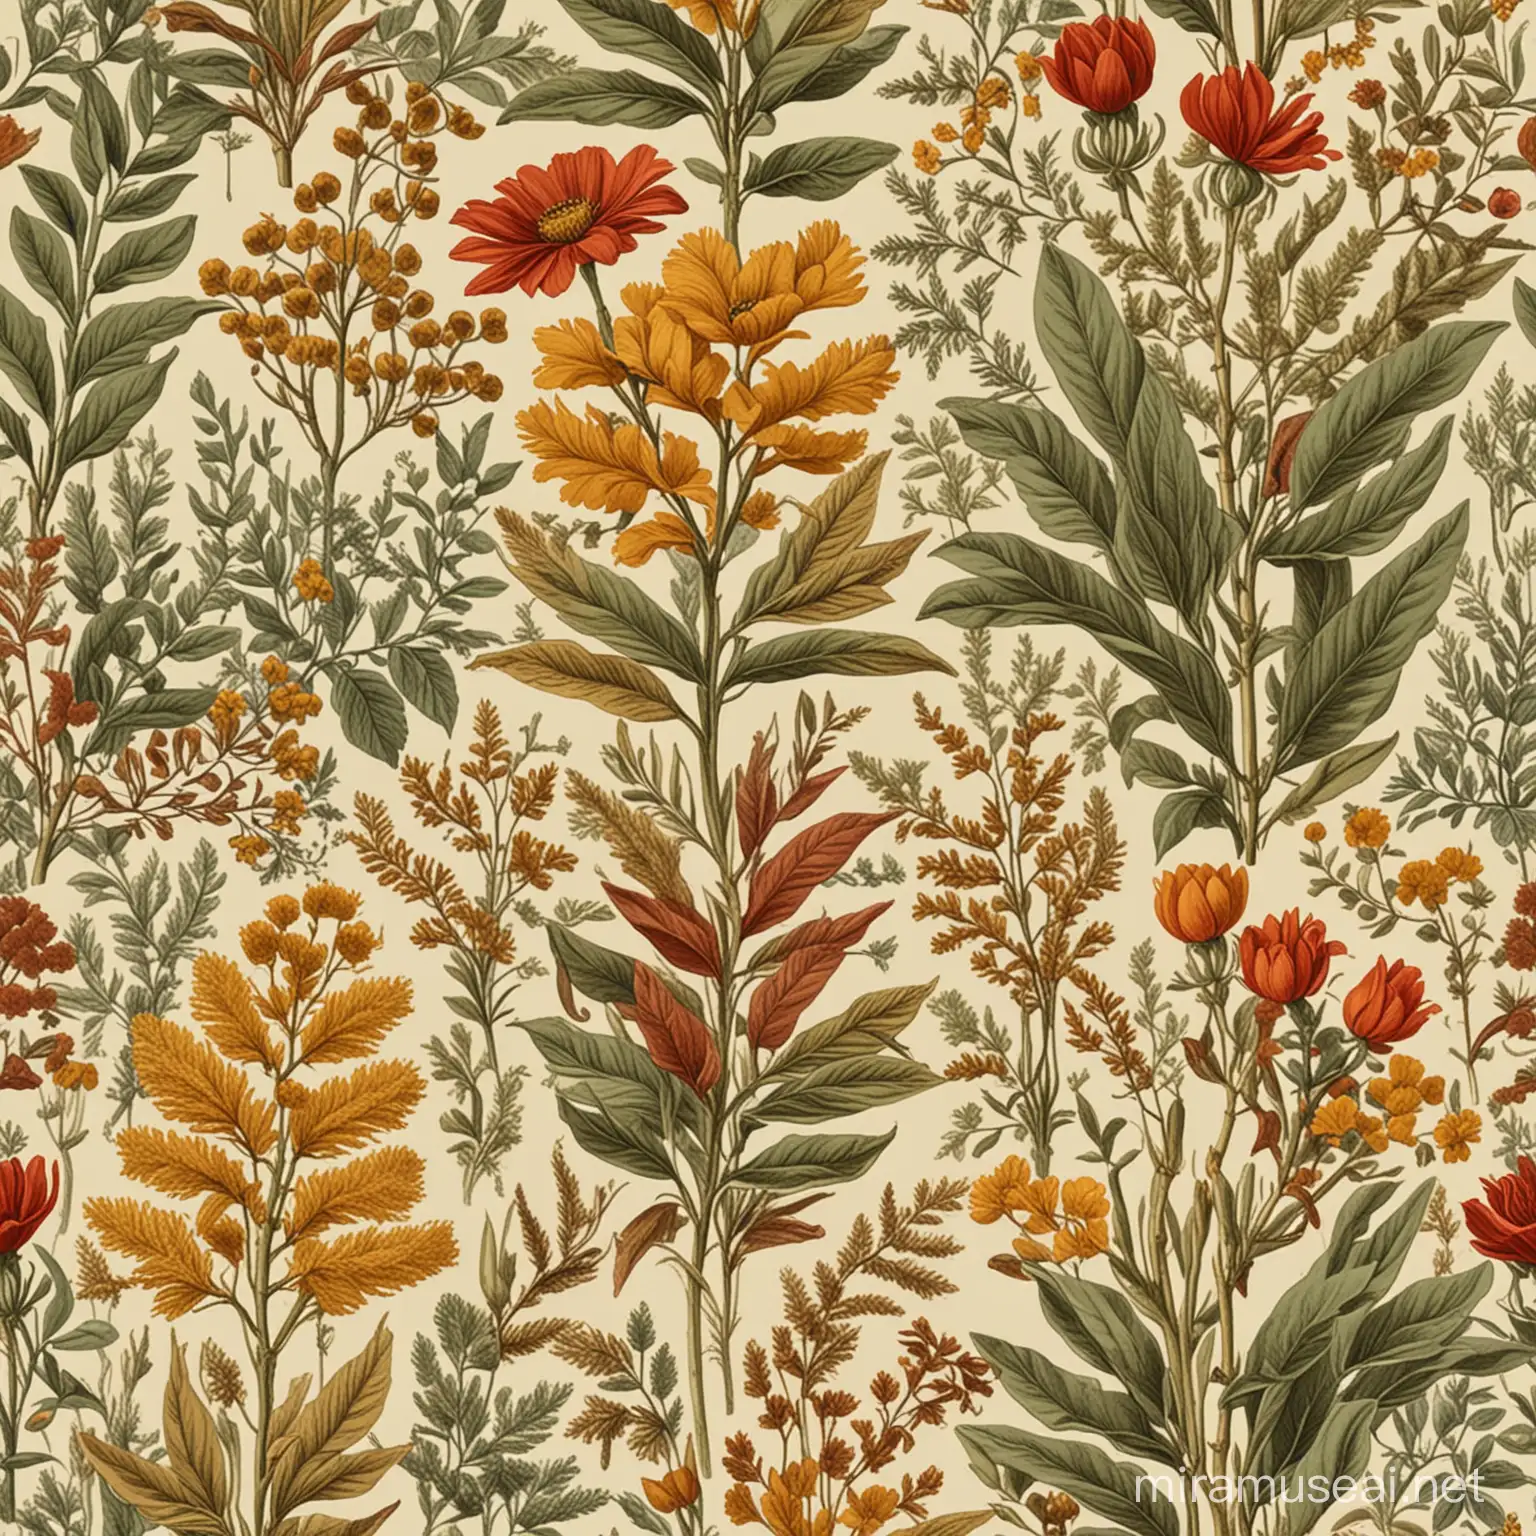 Vintage Botany: Inspired by nostalgic botanical book illustrations from bygone eras. Use earthy tones like mustard yellow, rust red, and olive green for a warm and cozy feel. The design should be detailed yet approachable to create a timeless and popular look.